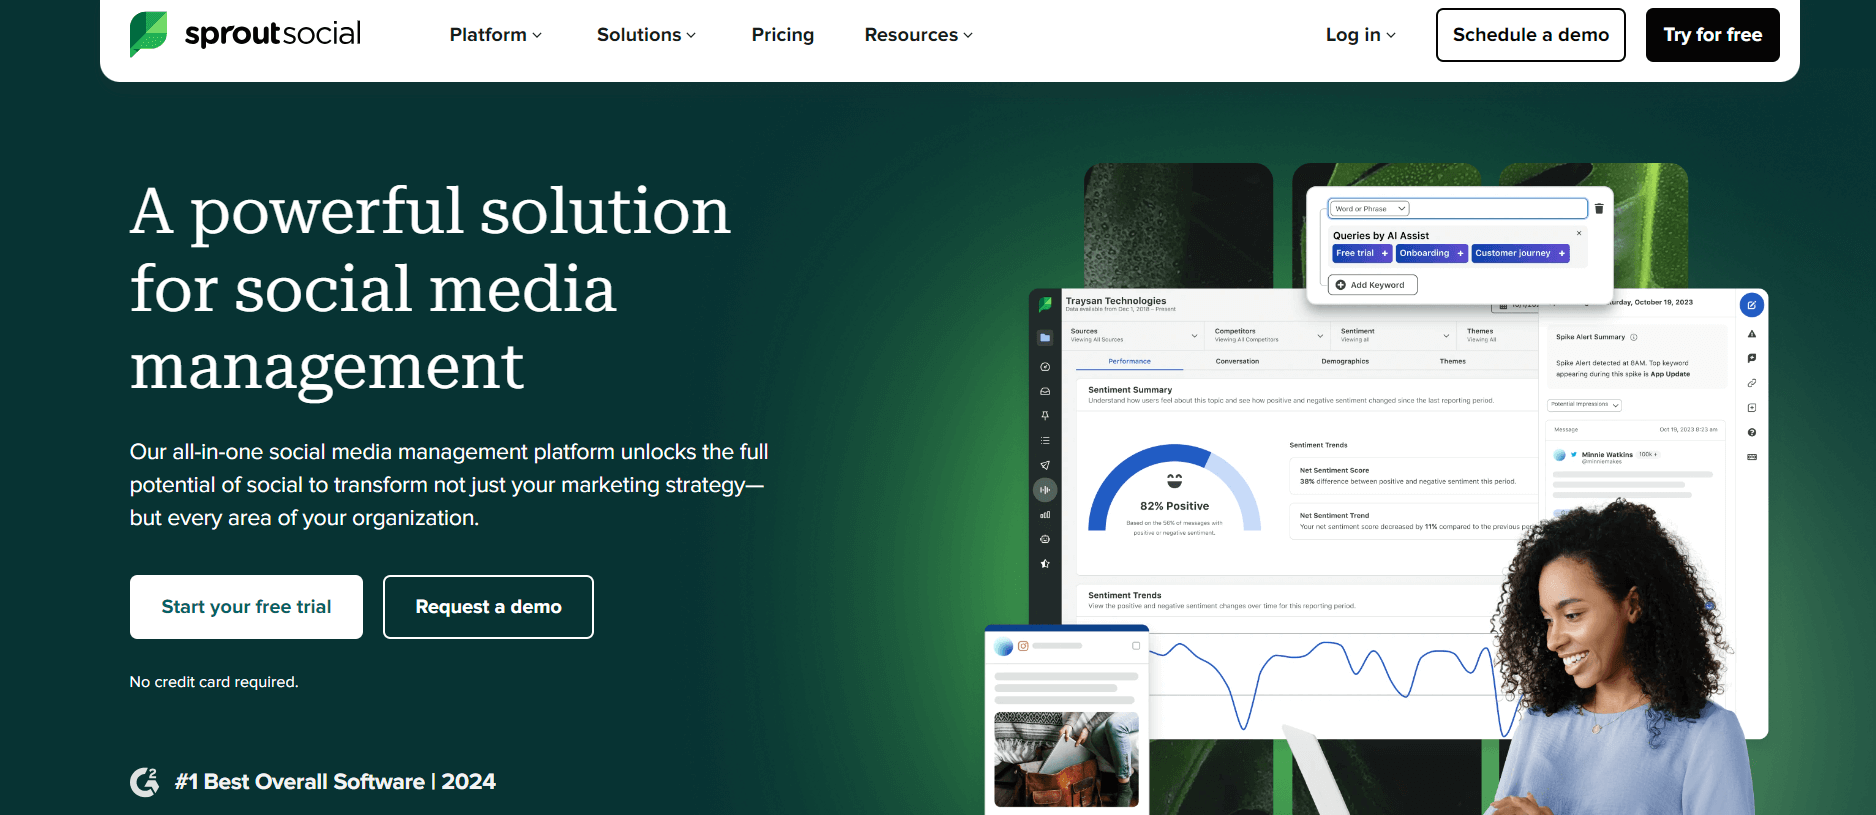 Sprout Social homepage highlighting its social media management platform, featuring options to start a free trial or request a demo.